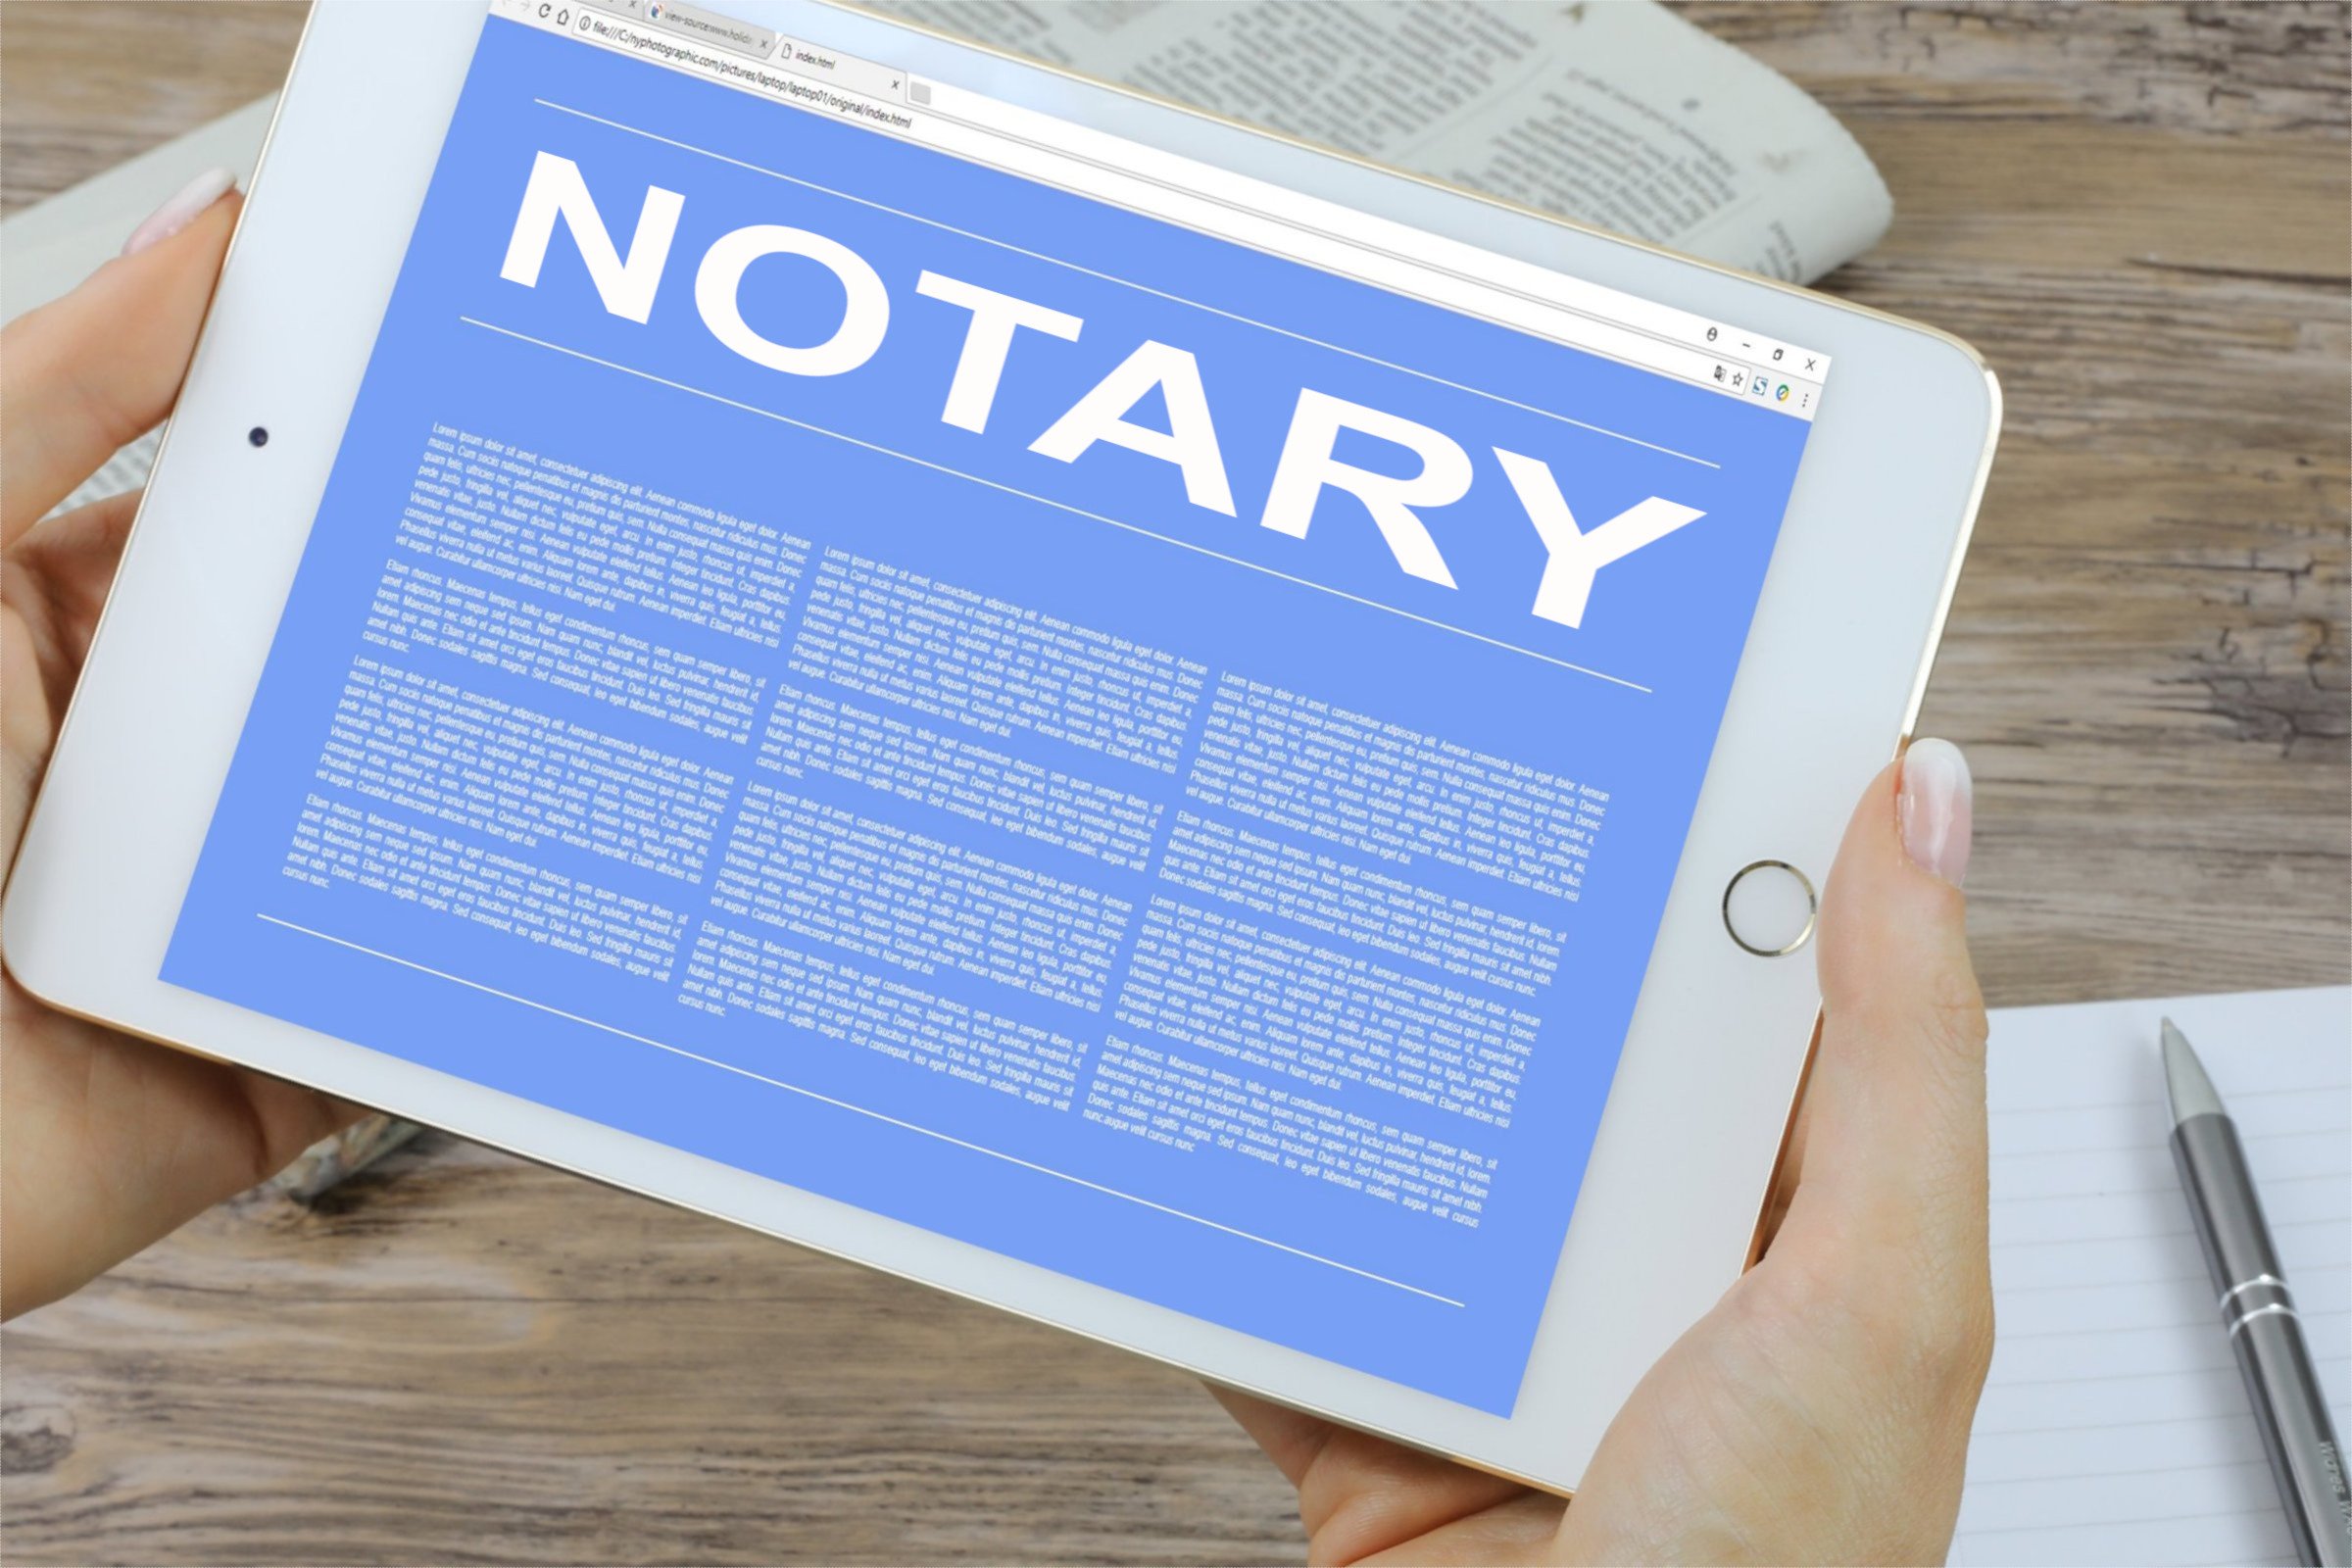 notary